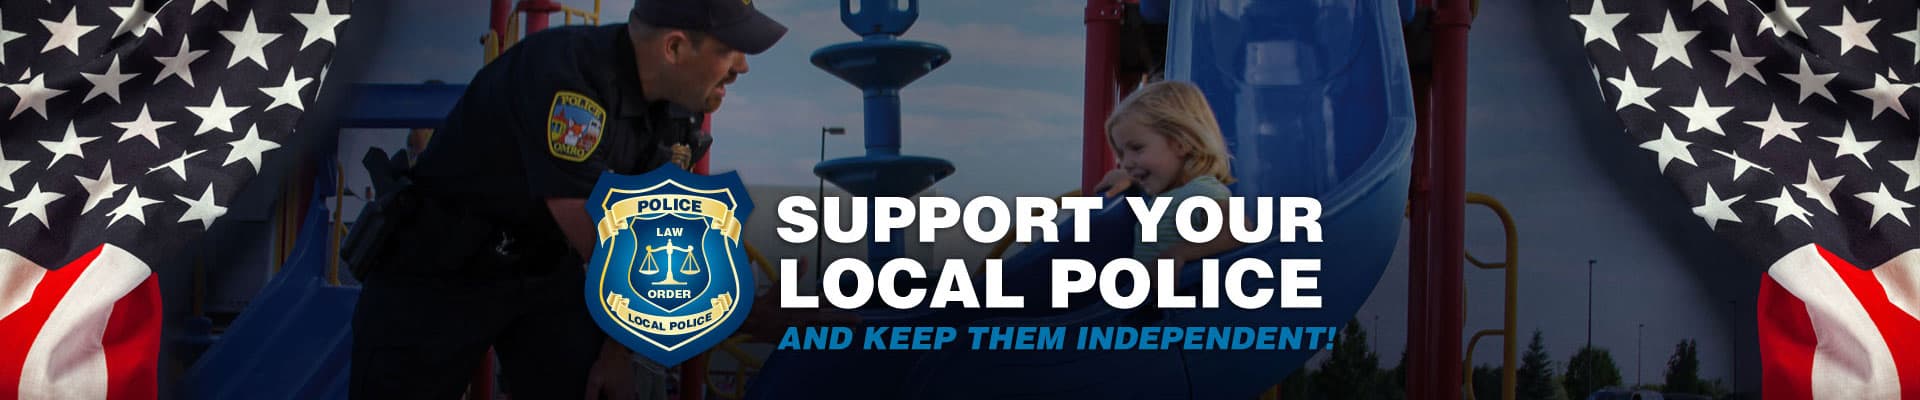 John Birch Society Video: Support Your Local Police